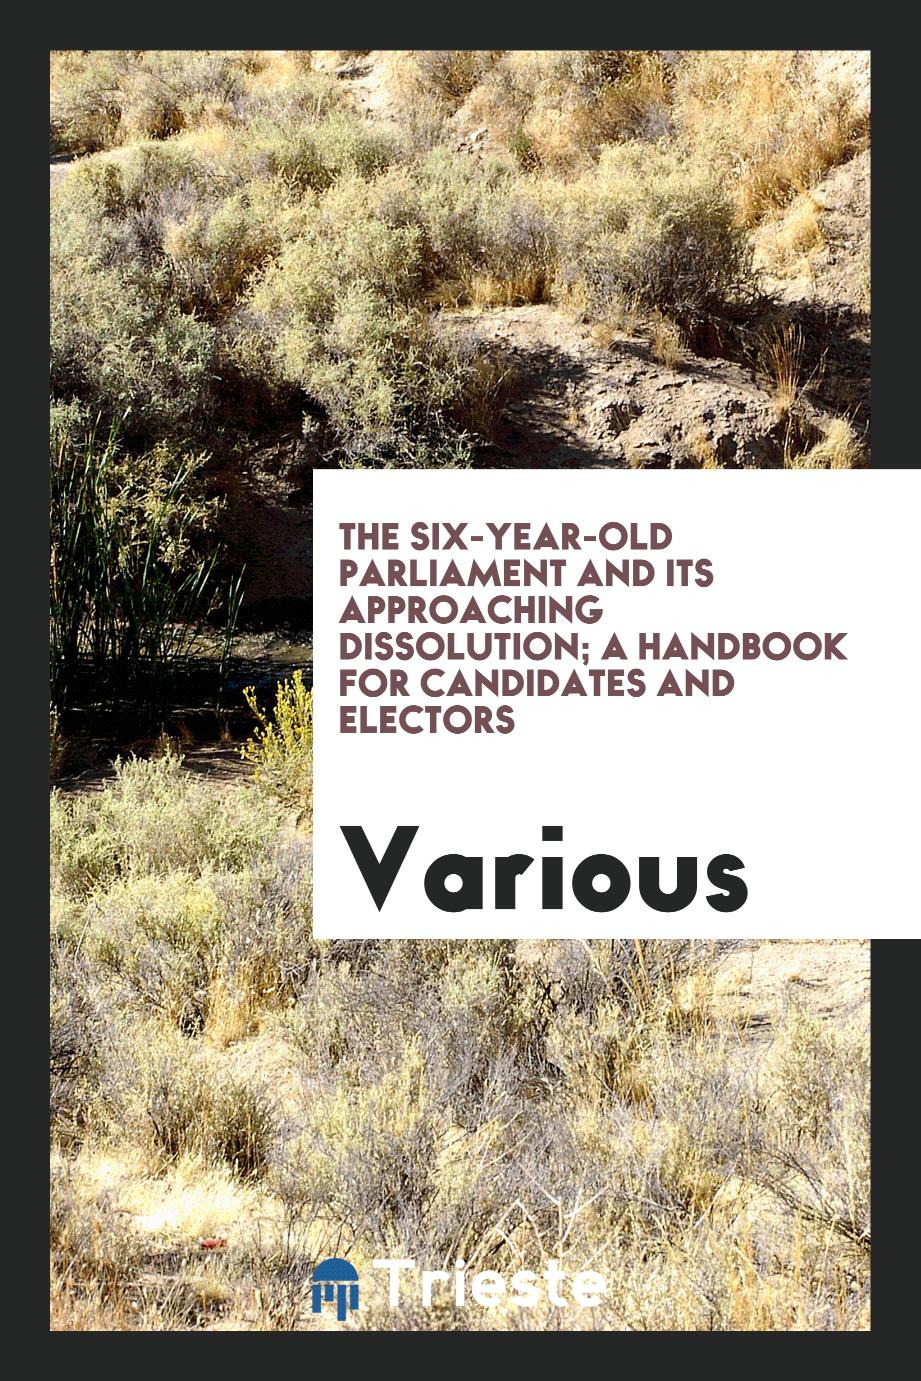 The six-year-old parliament and its approaching dissolution; a handbook for candidates and electors